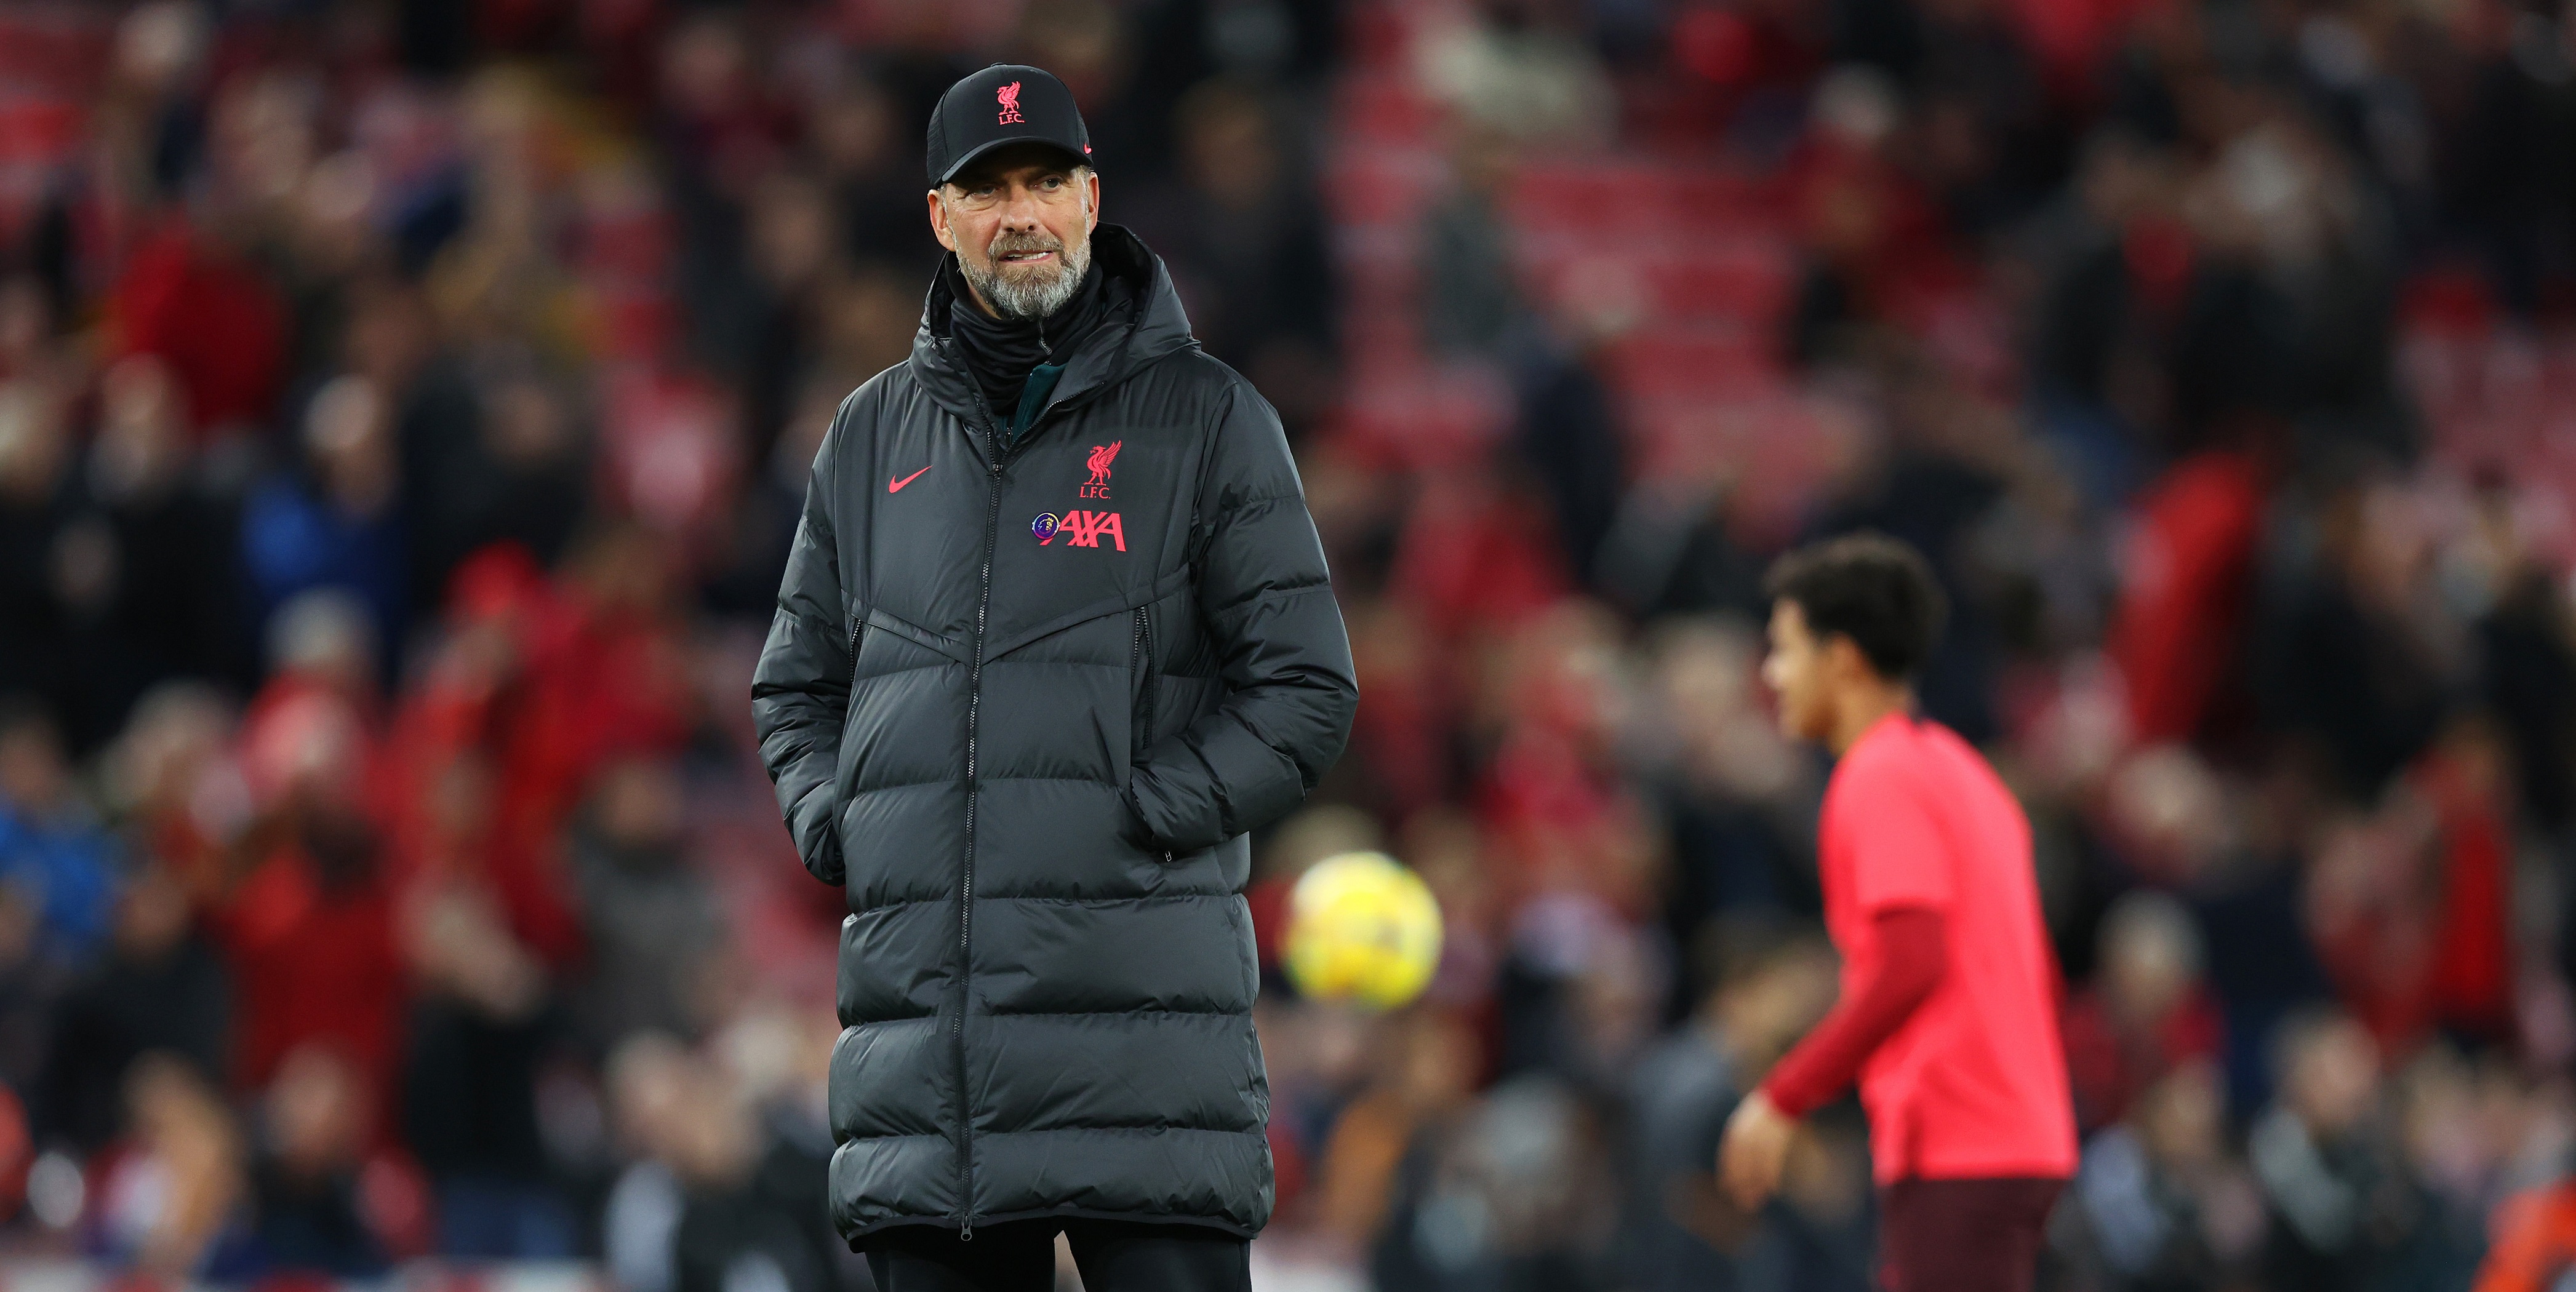 Jurgen Klopp explains what he wants to see from his Liverpool side as they prepare for Napoli clash